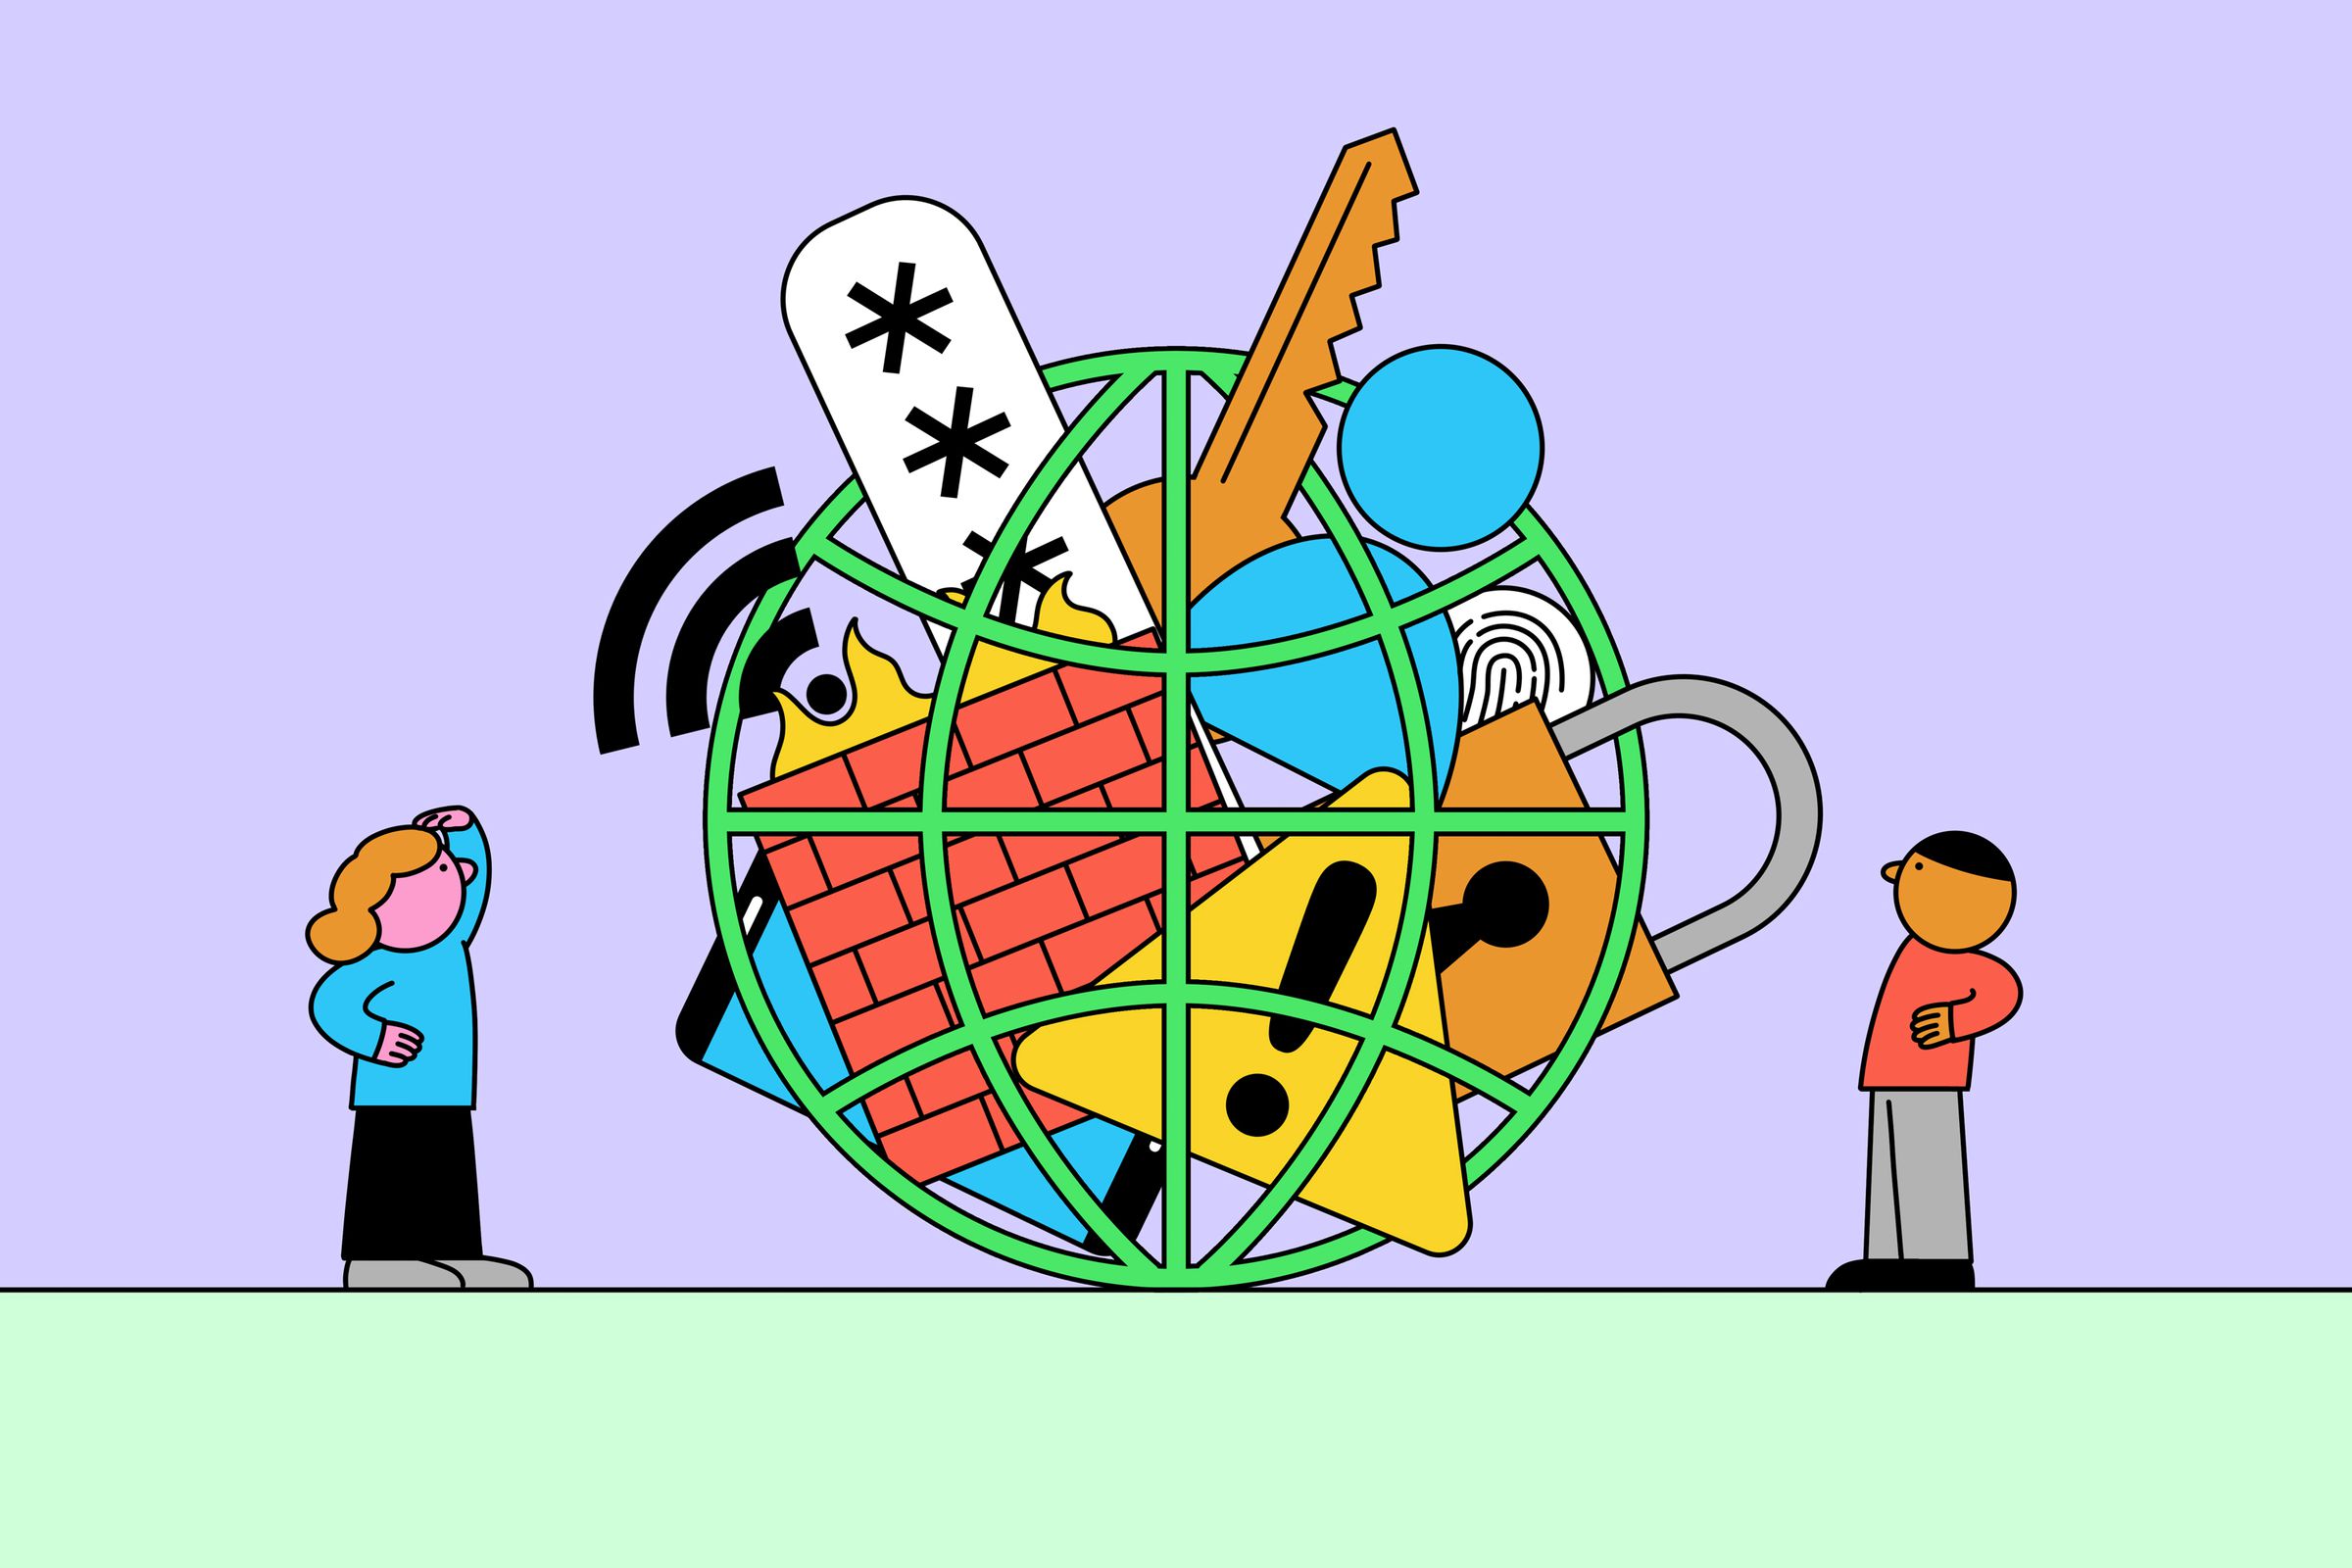 Two cartoon figures stand on either side of a globe-shaped cage, which contains a jumble of cartoon icons including a caution sign and an oversized padlock.